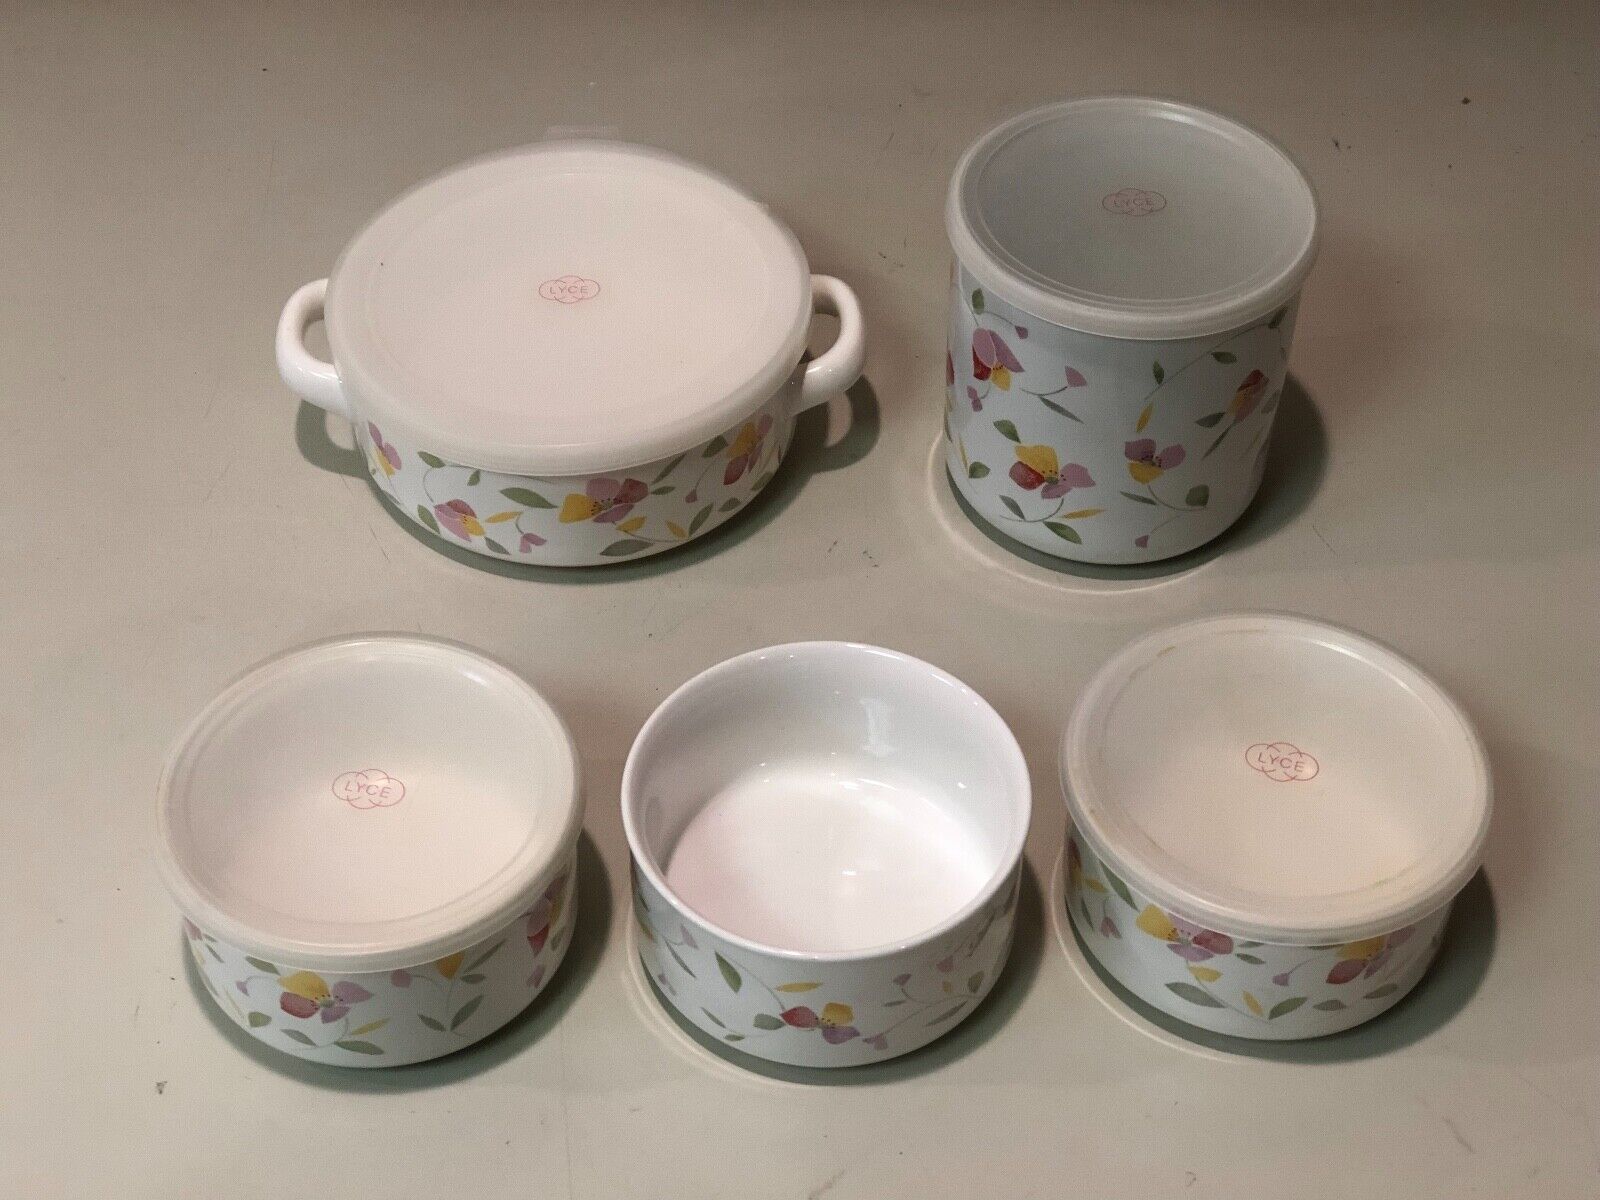 Vintage Zojirushi Ceramic Bowl/Container Set of 5 with Lid - Made in Japan